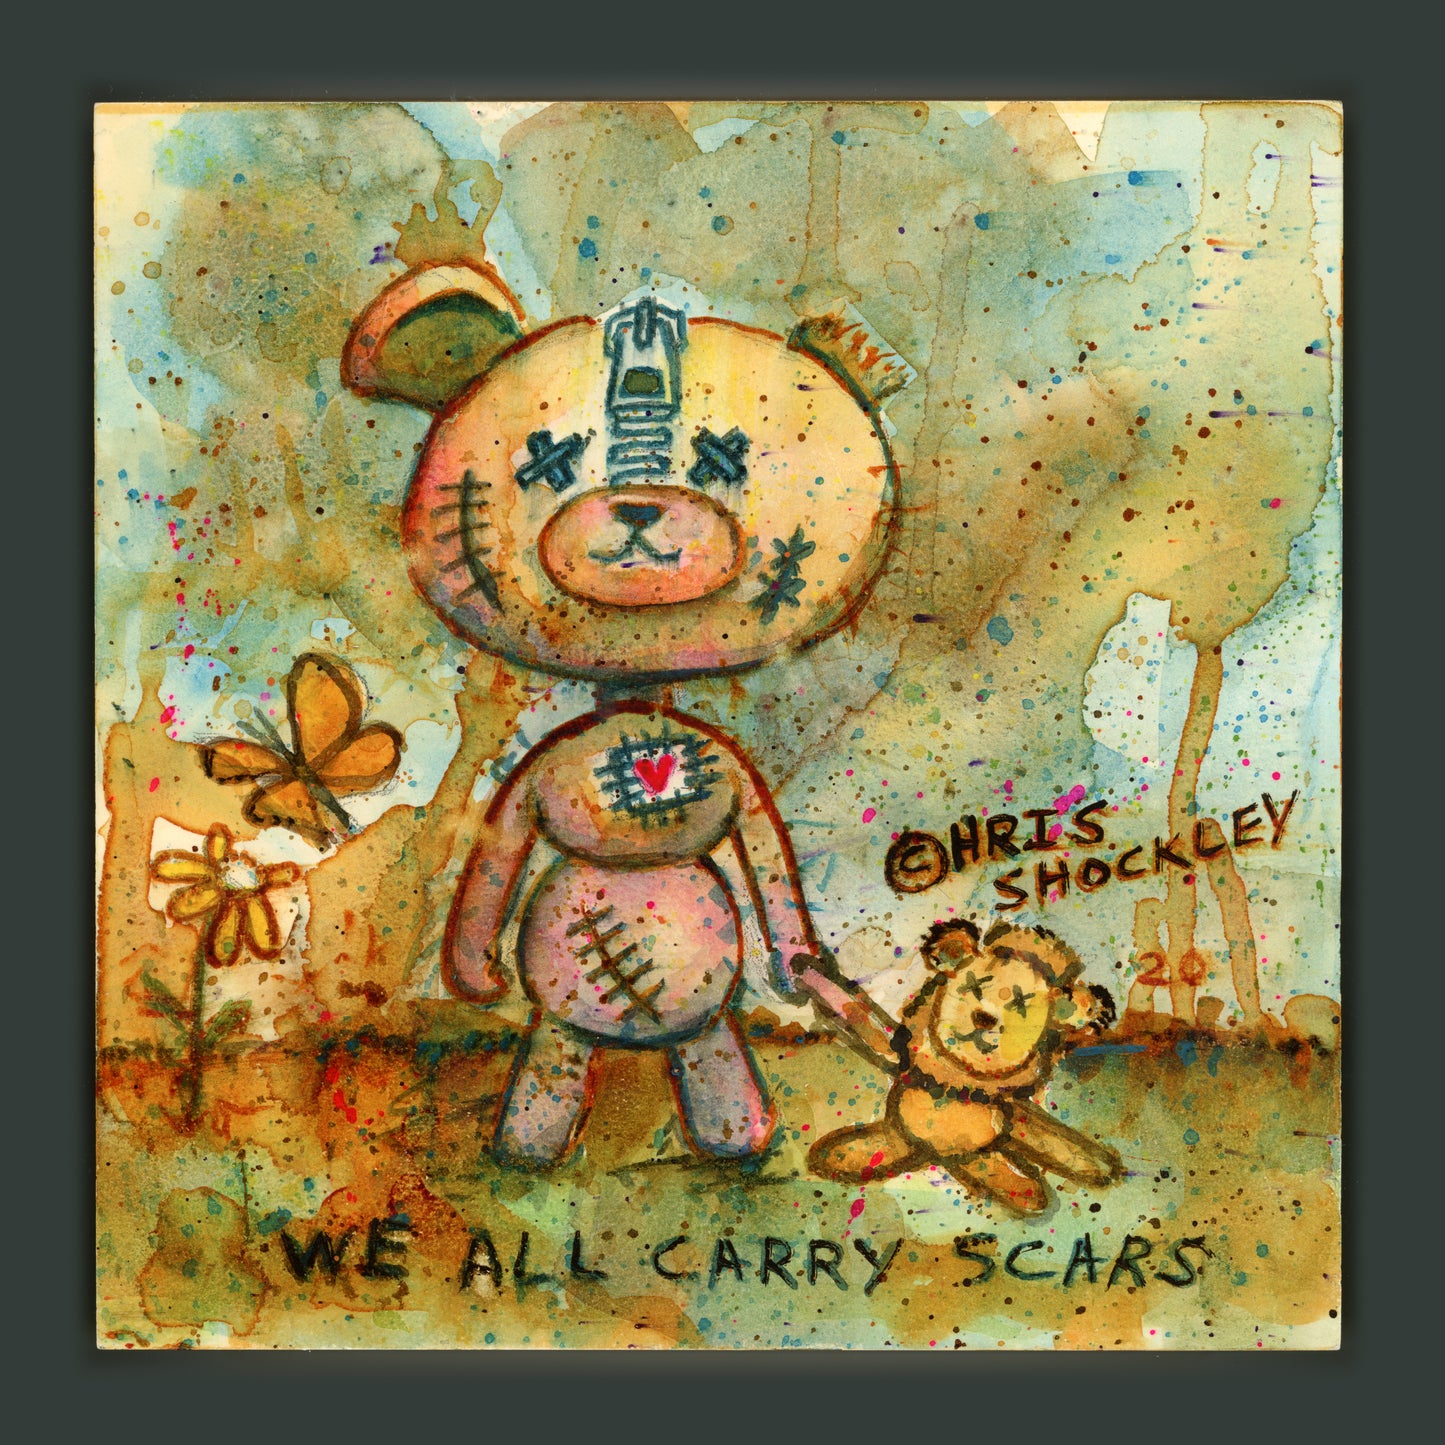 8"x8" original painting: "We All Carry Scars"